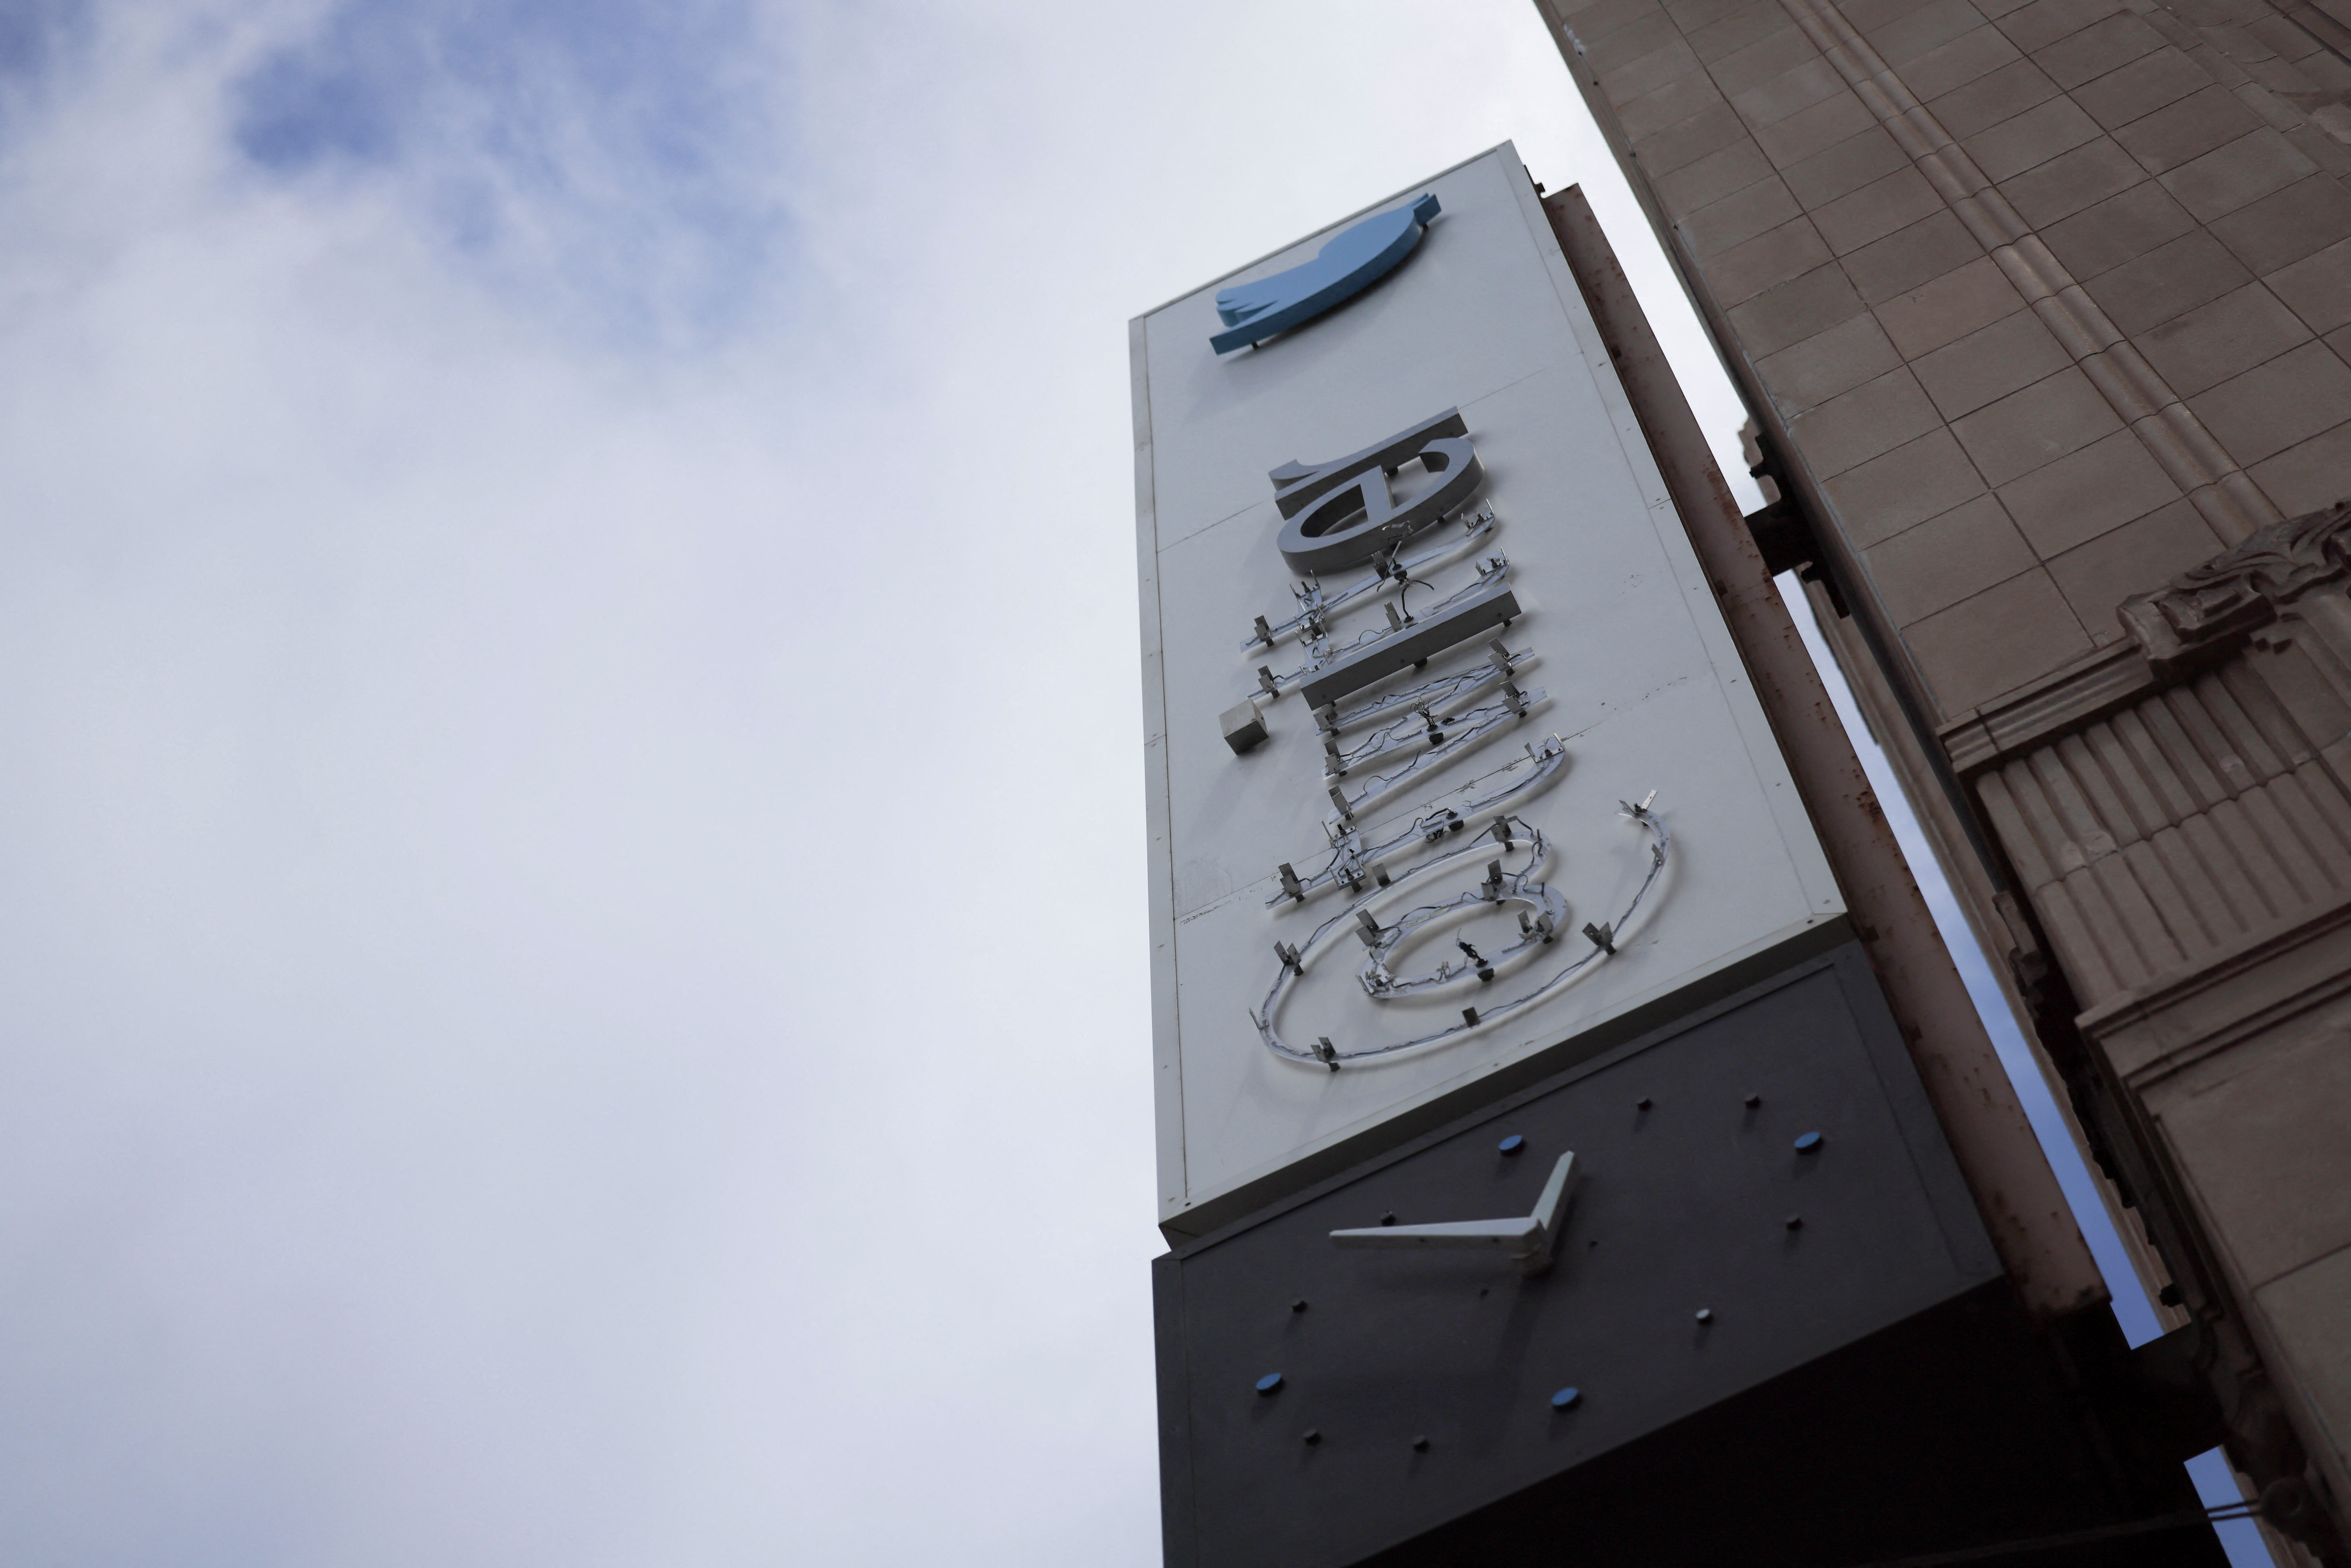 A partially dismantled Twitter's sign is seen at Twitter's corporate headquarters building in San Francisco